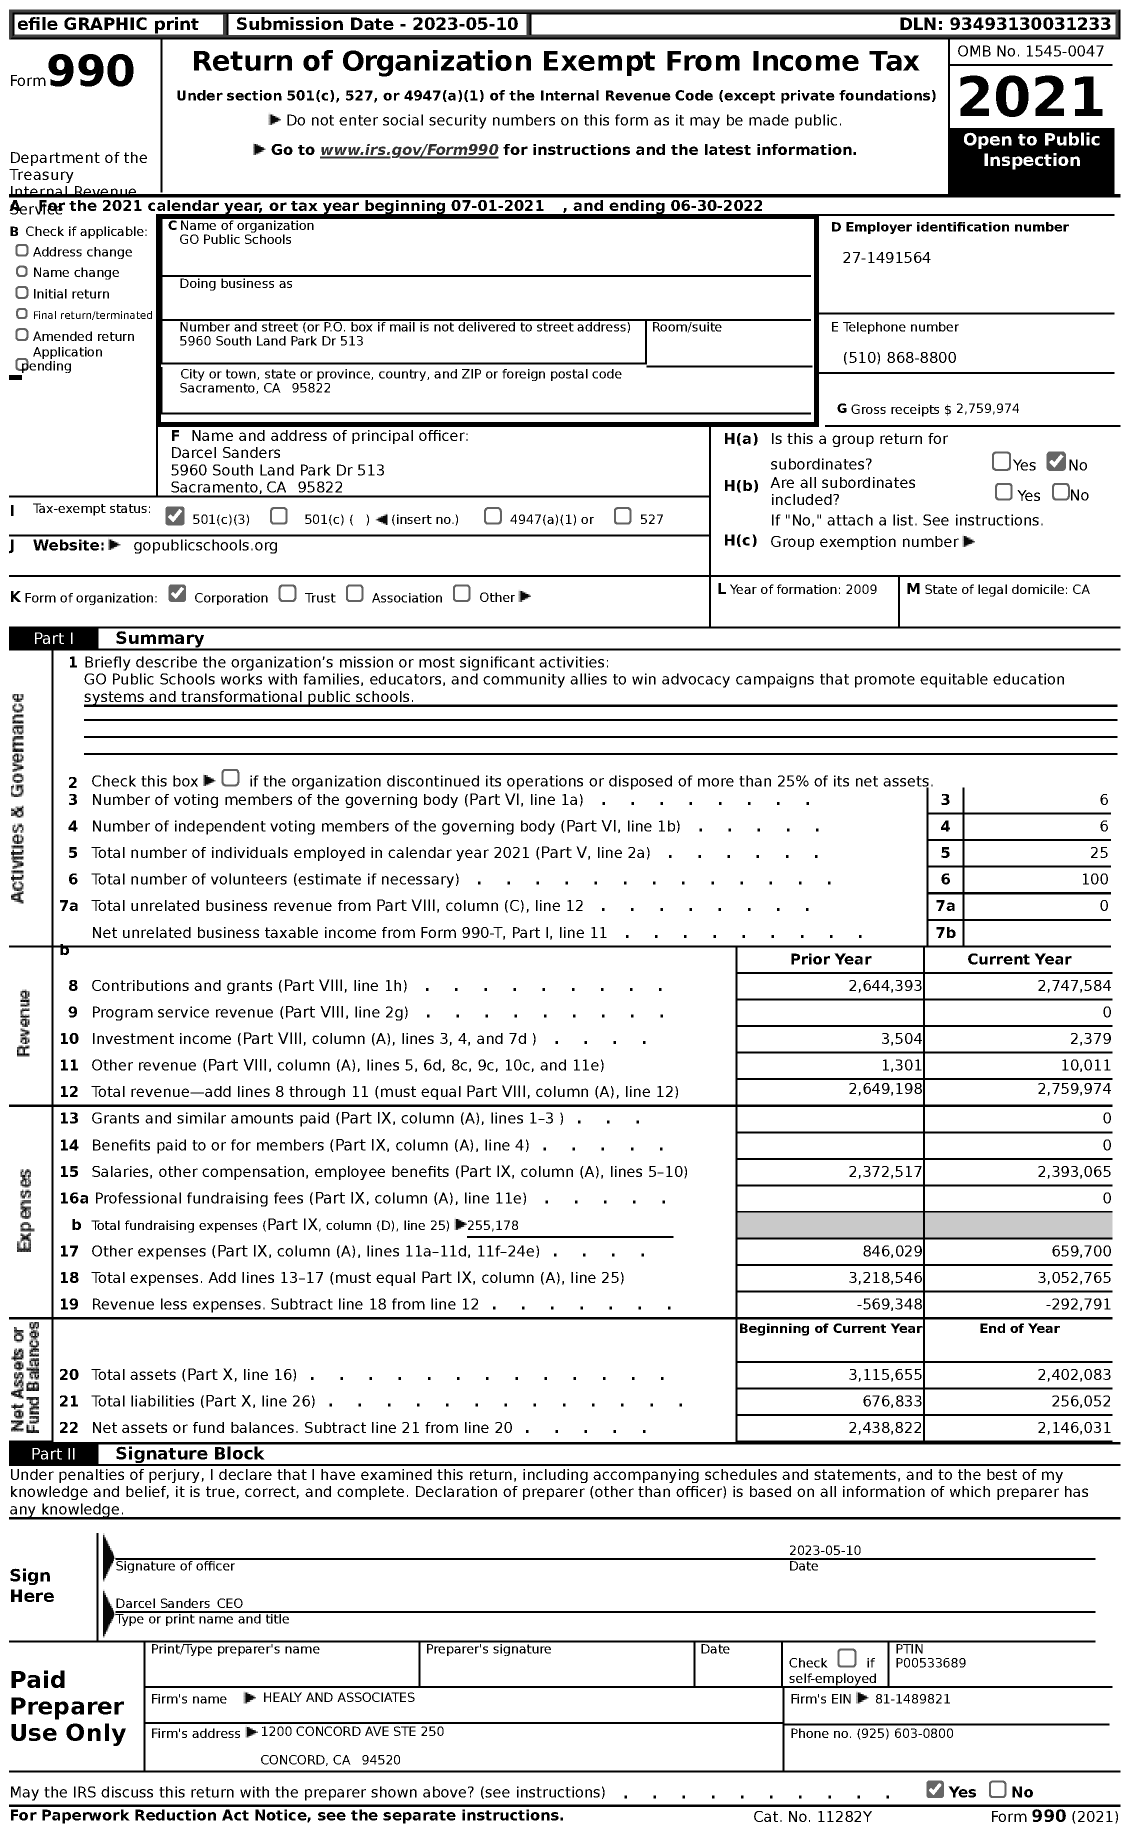 Image of first page of 2021 Form 990 for GO Public Schools (GO)